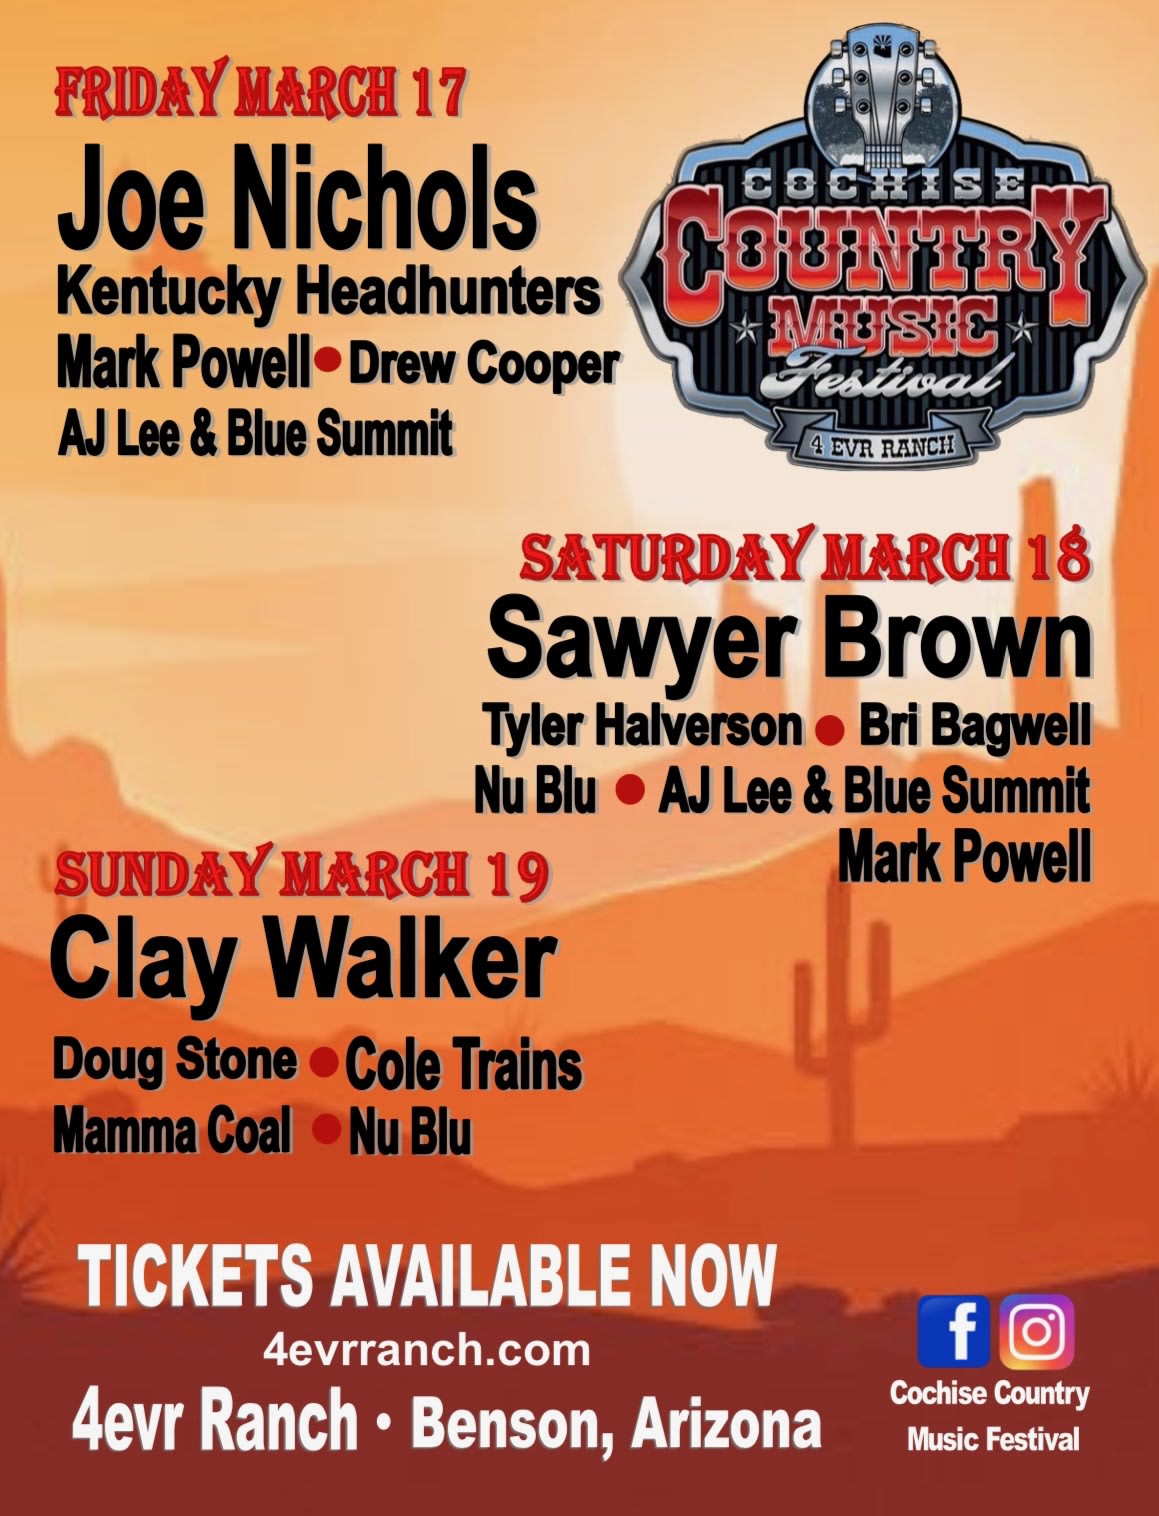 Cochise Country Music Festival Information 4Evr Ranch Equestrian